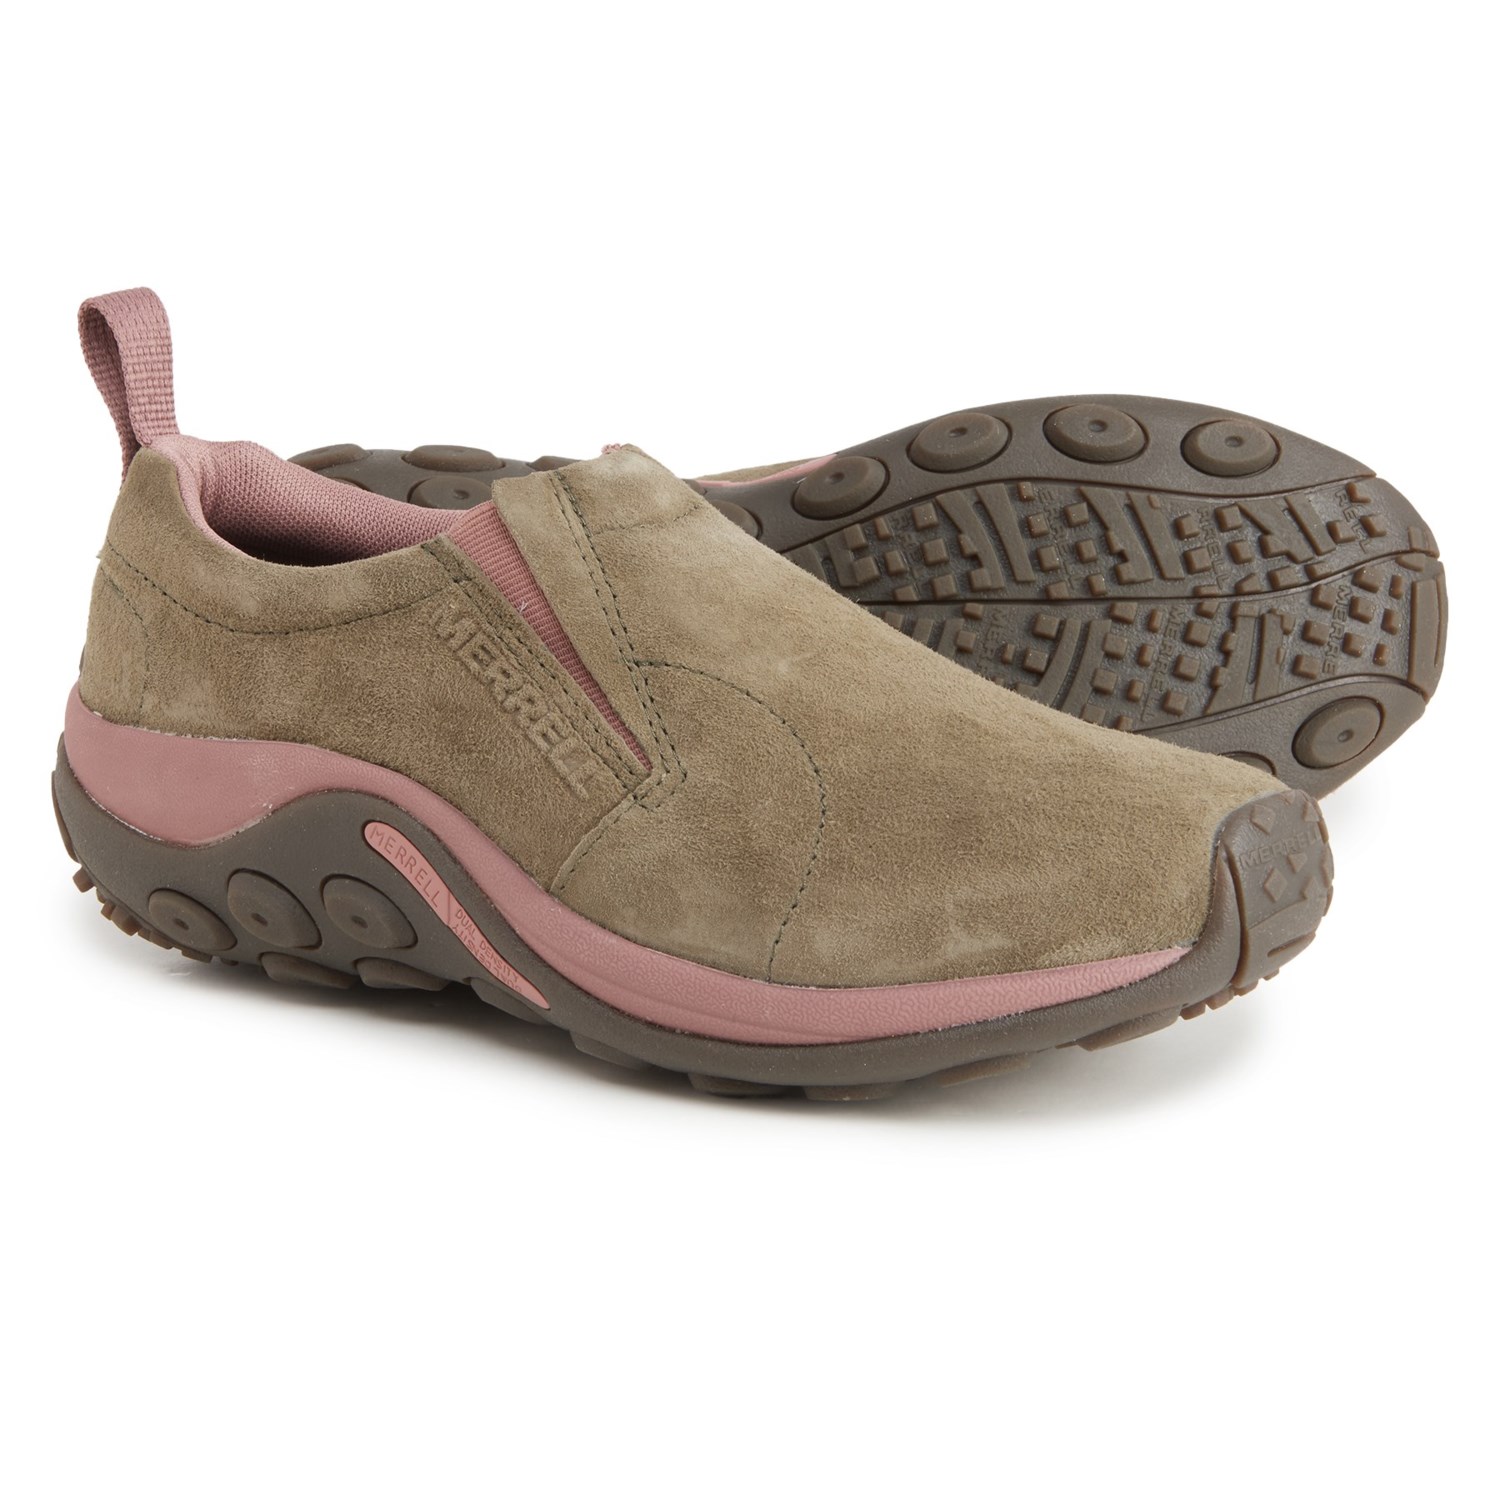 Merrell Jungle Shoes (For Women) - Save 51%